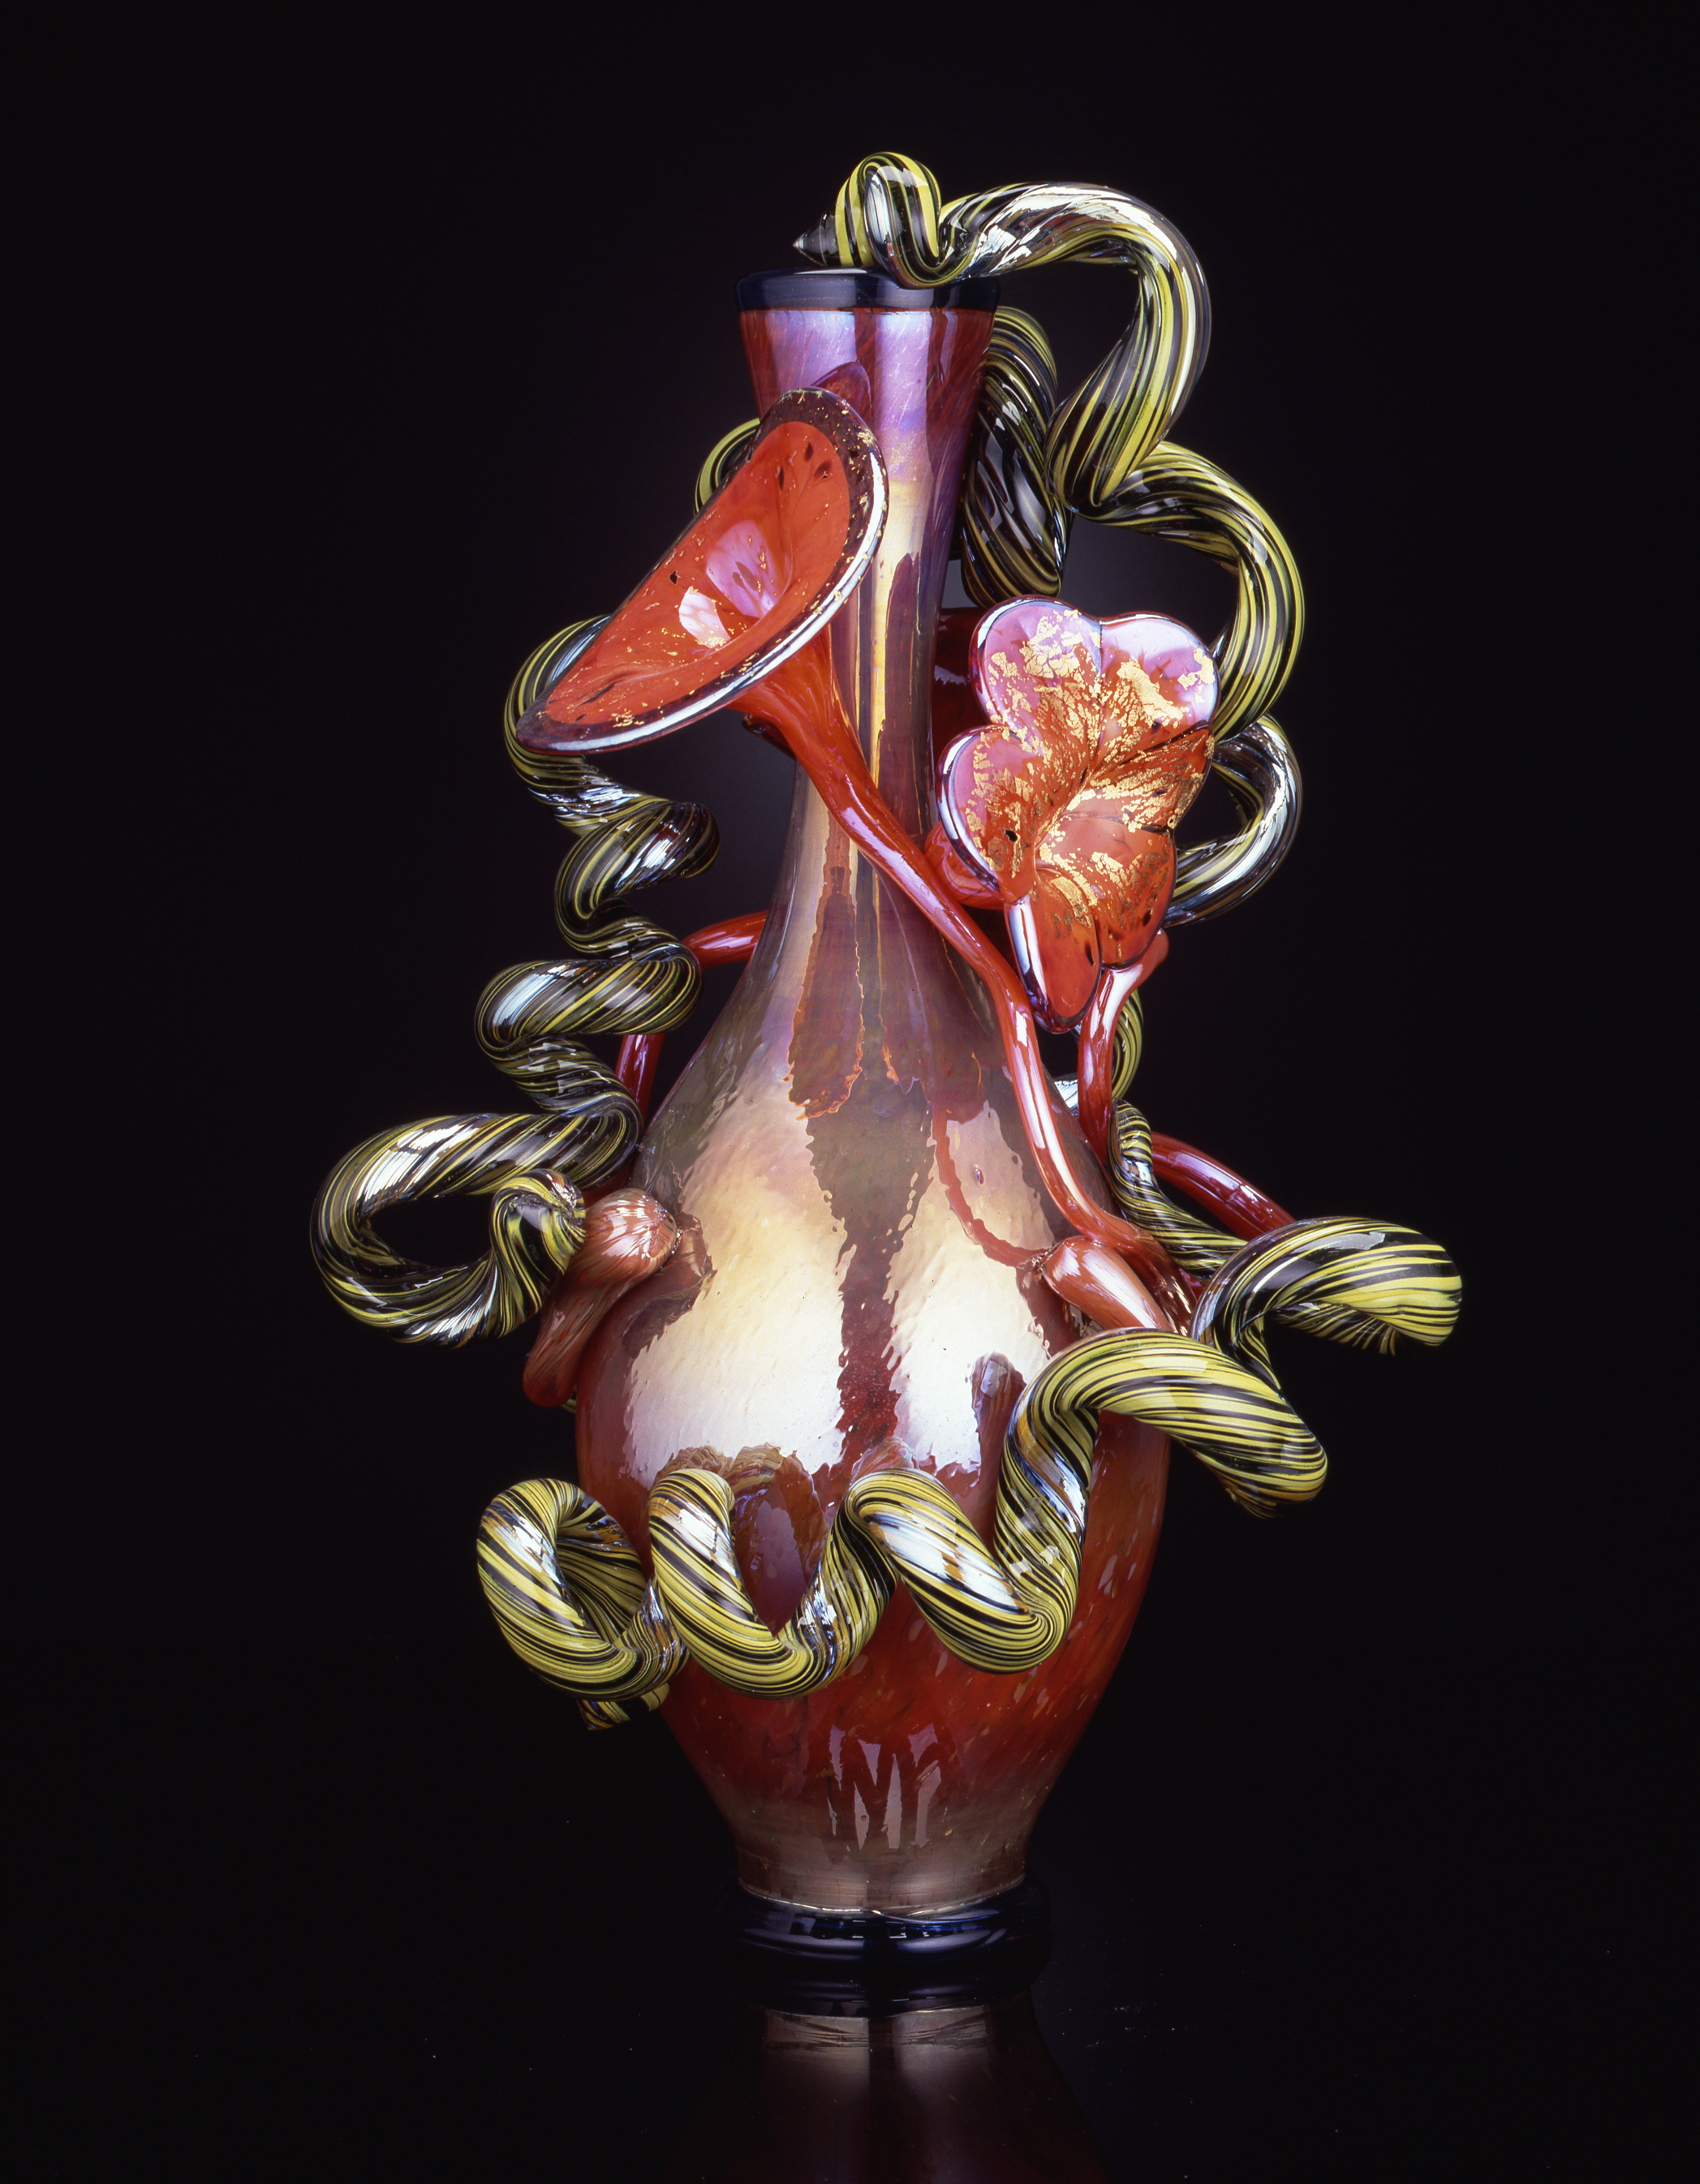  Dale Chihuly,&nbsp; Iridescent Orange Venetian&nbsp; (1990, glass, 24 x 14 x 14 inches) 